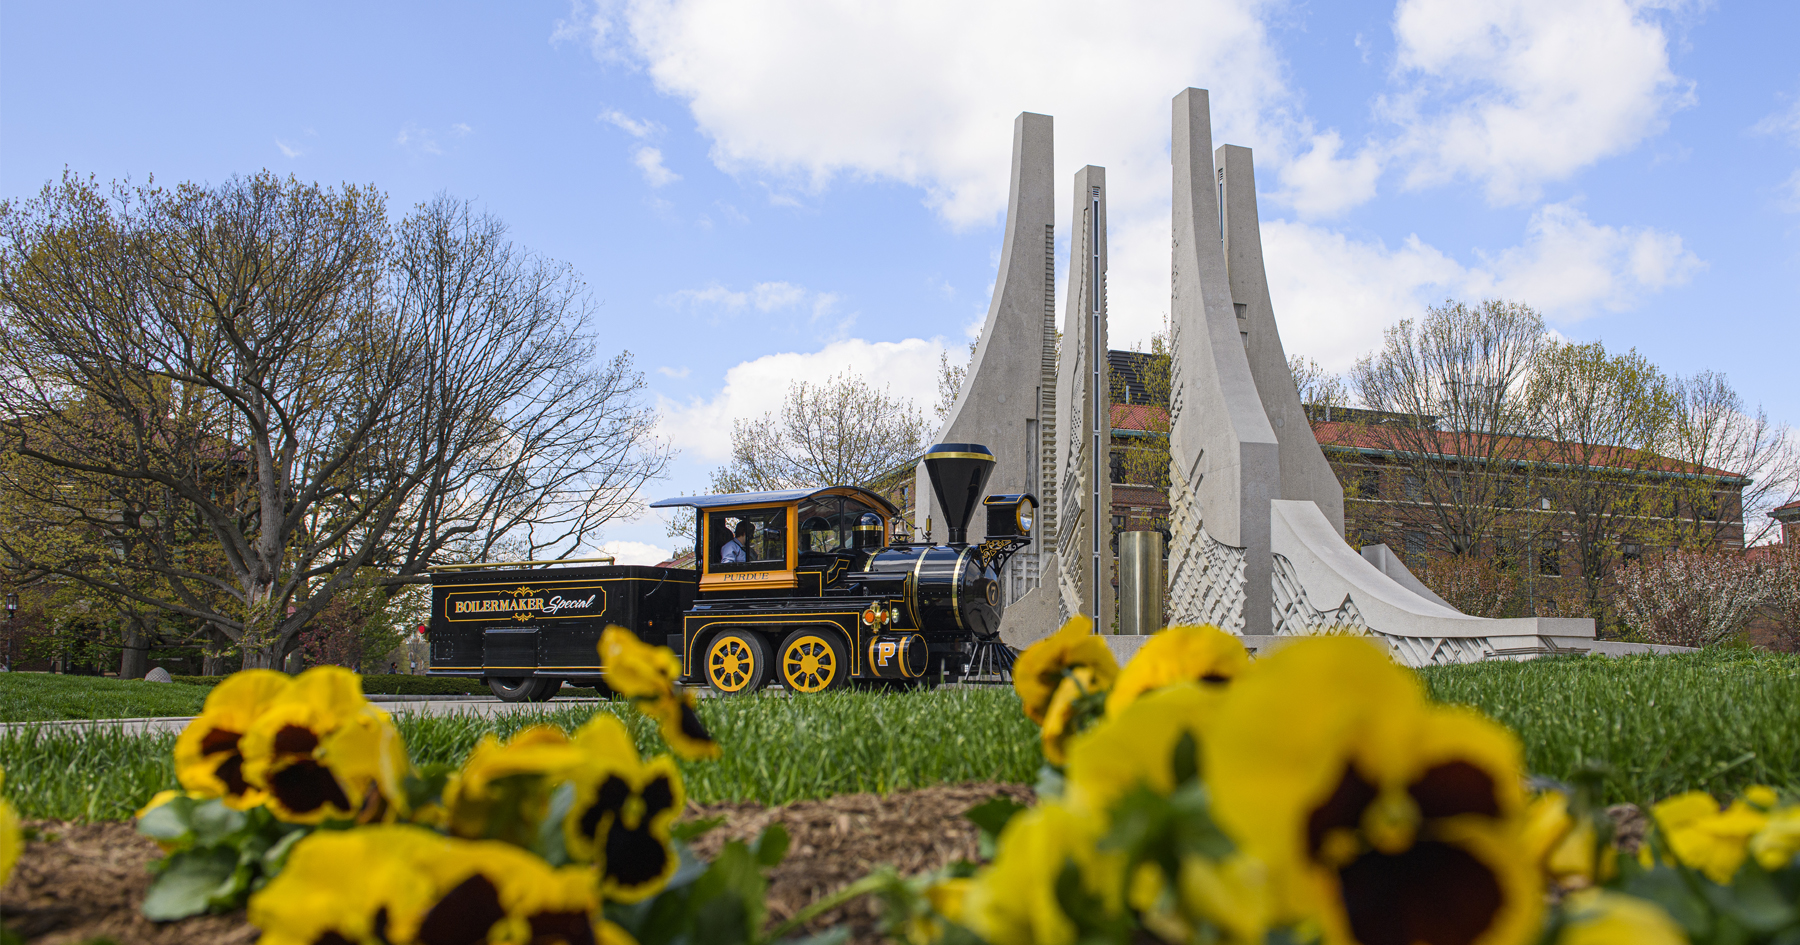 The Boilermaker Special next to the Engineering Fountain